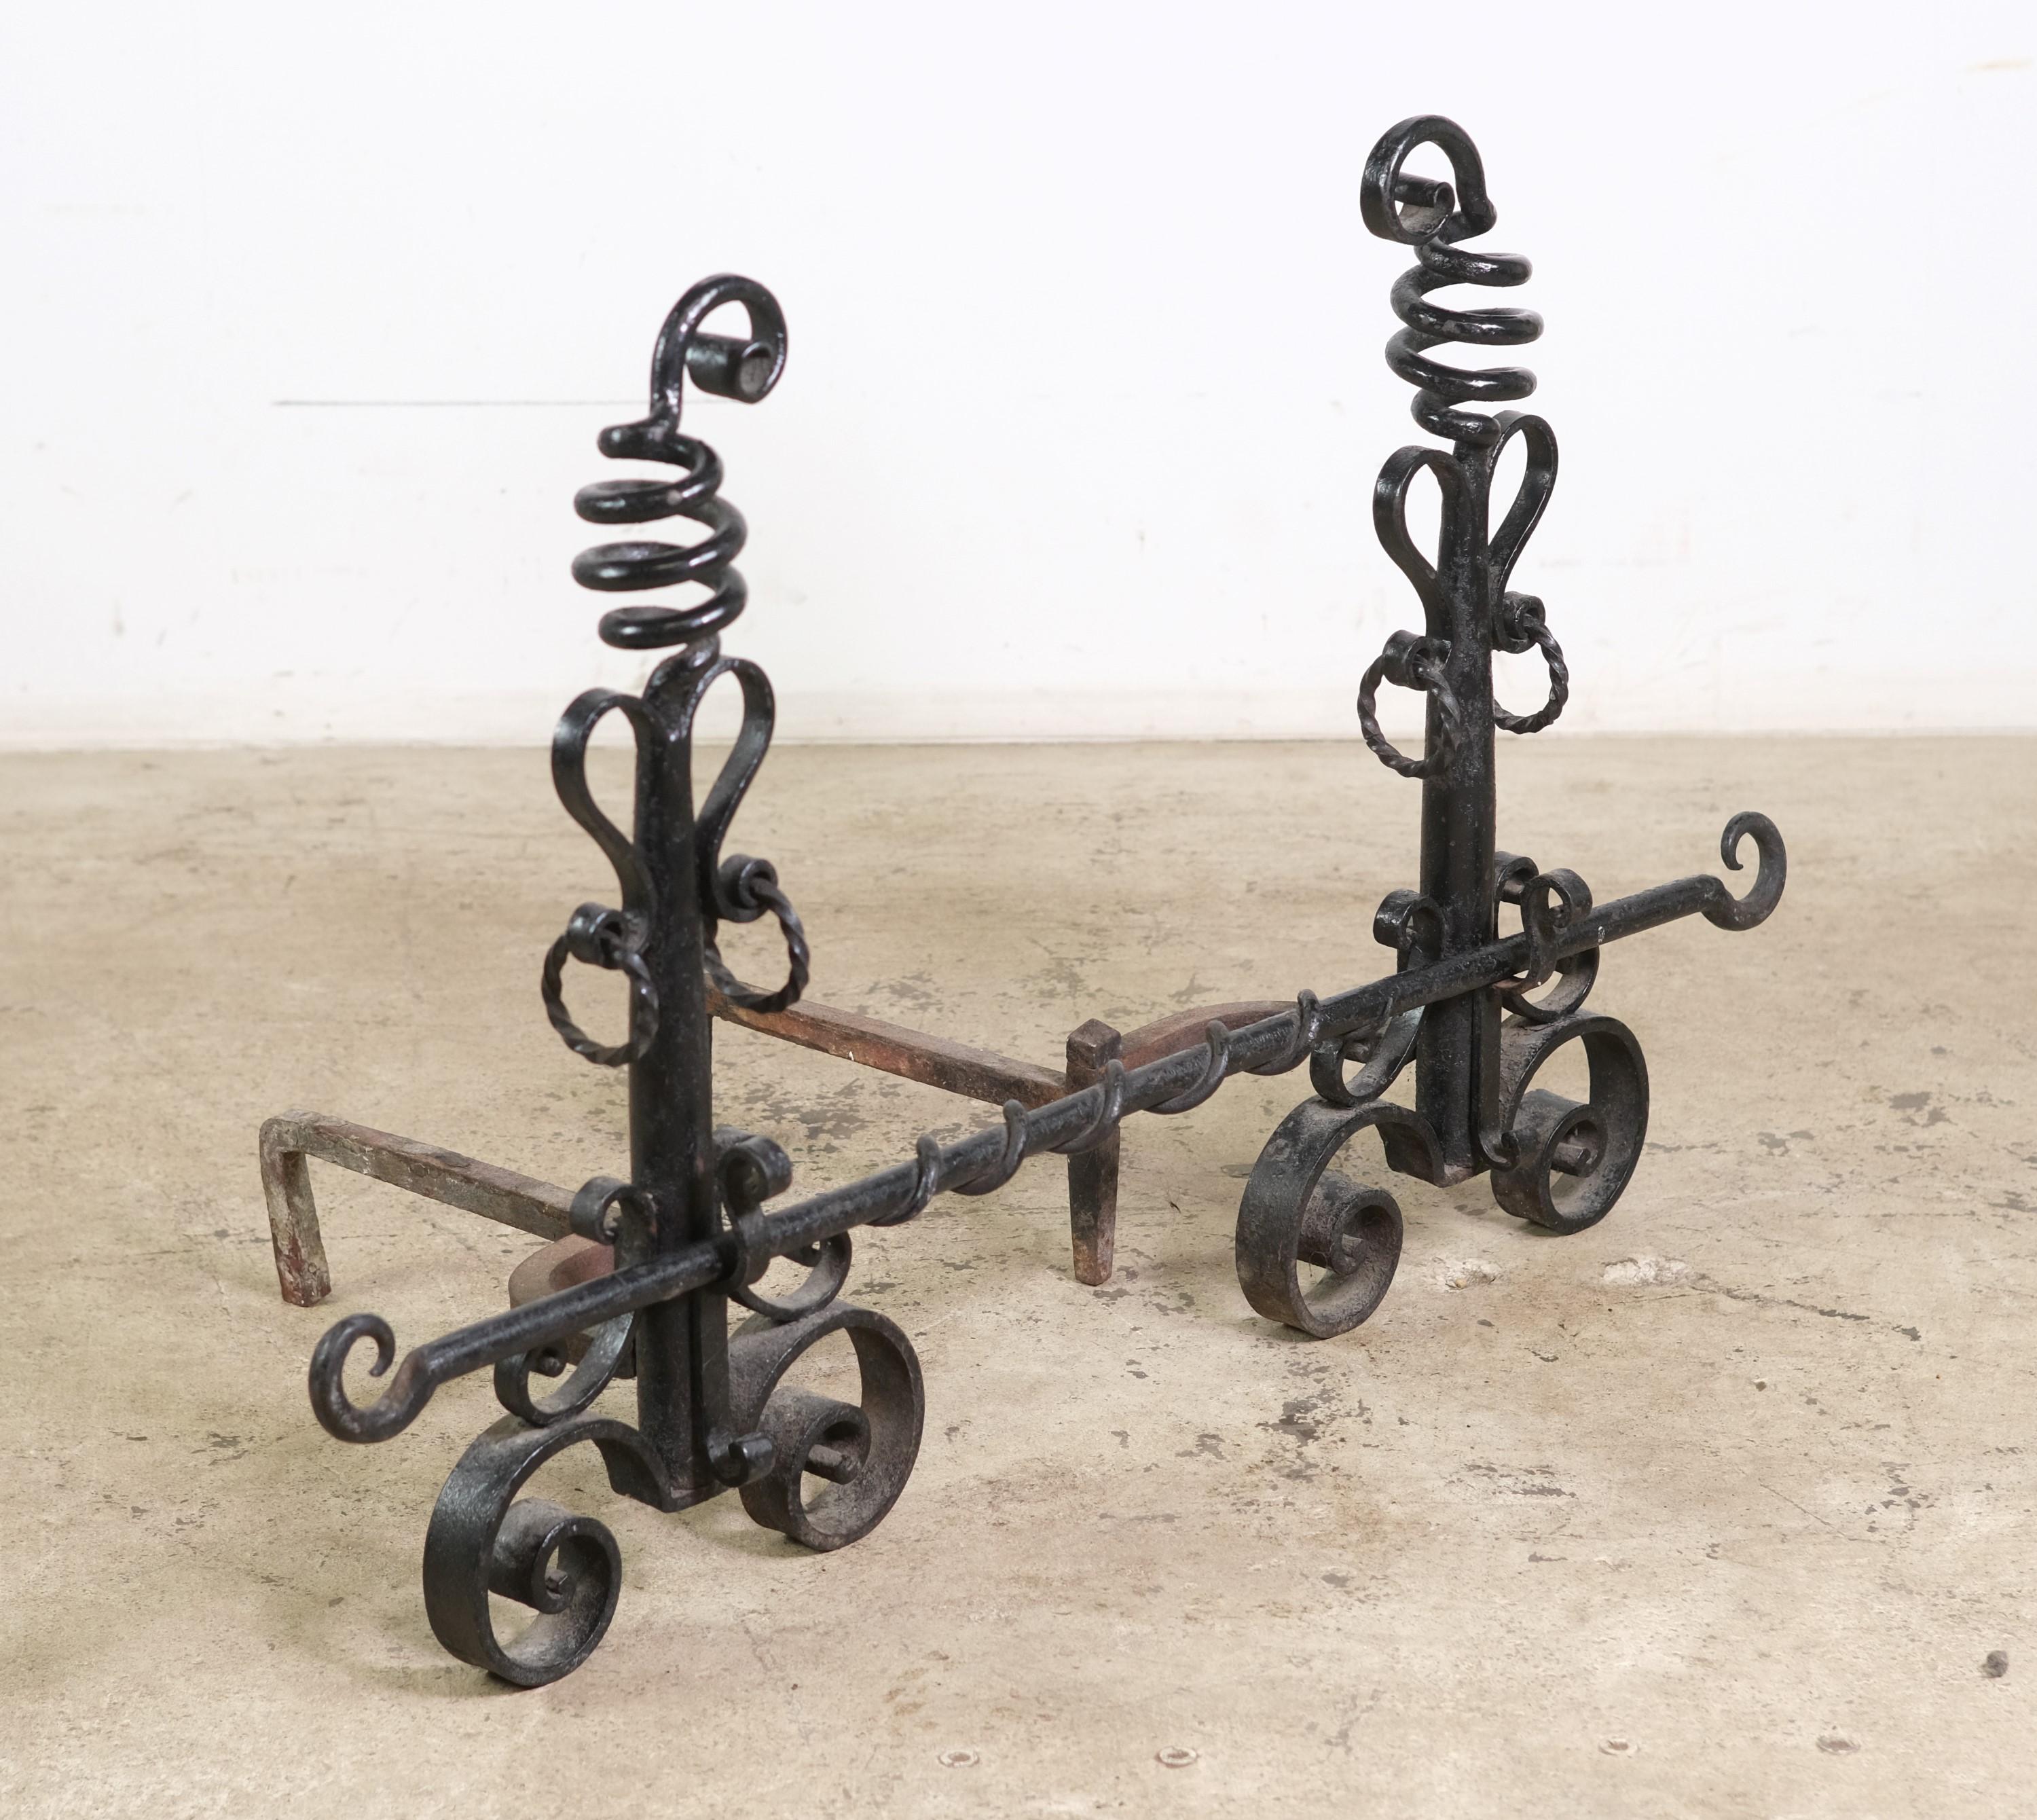 Black painted hand wrought iron andirons with spiral and coil motifs. The cross bar is included. Please note, this item is located in our Scranton, PA location.